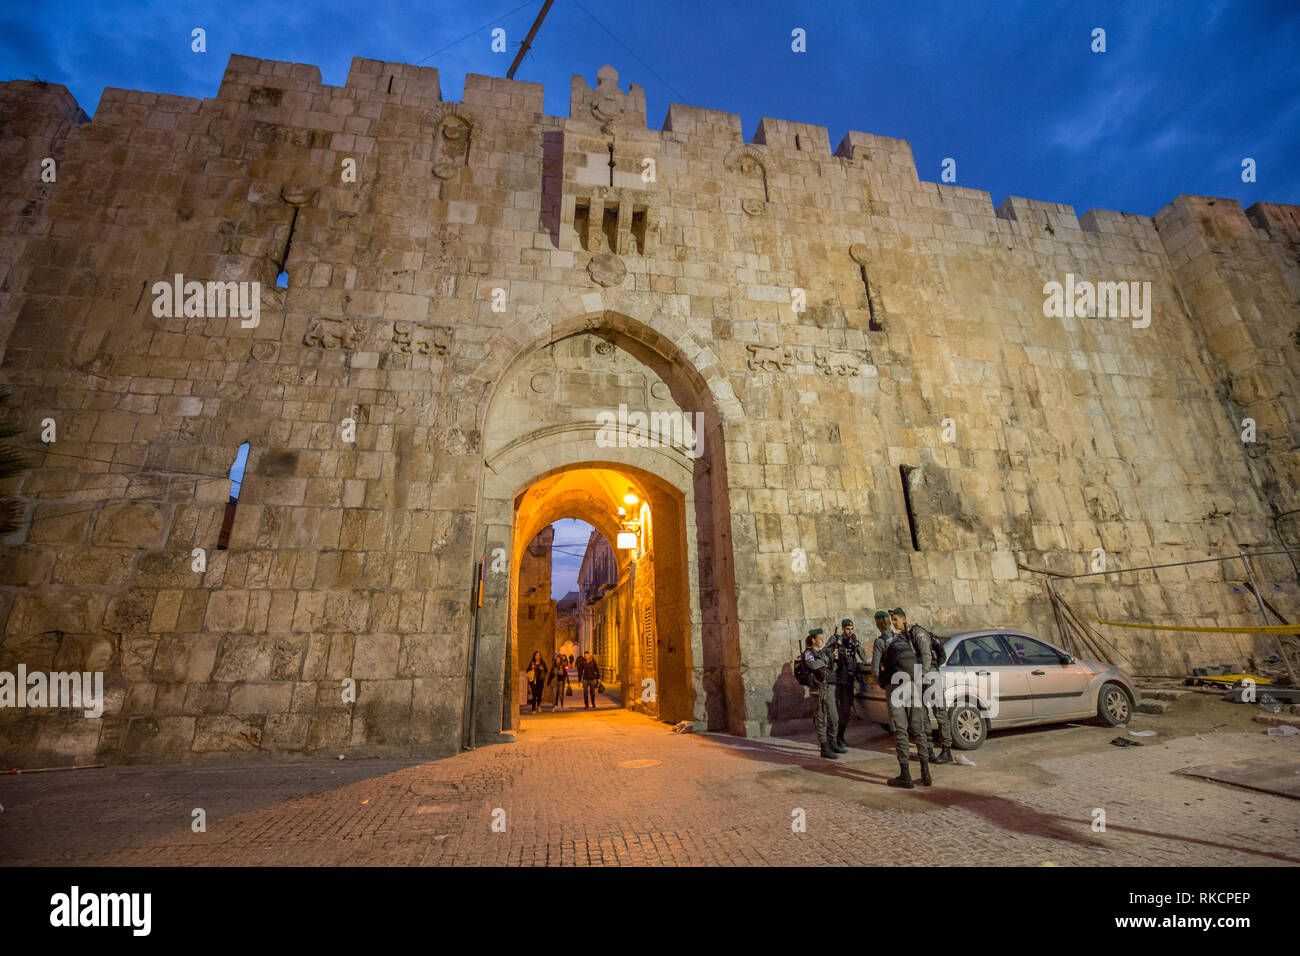 The lions gate in old center of Jerusalem Stock Photo